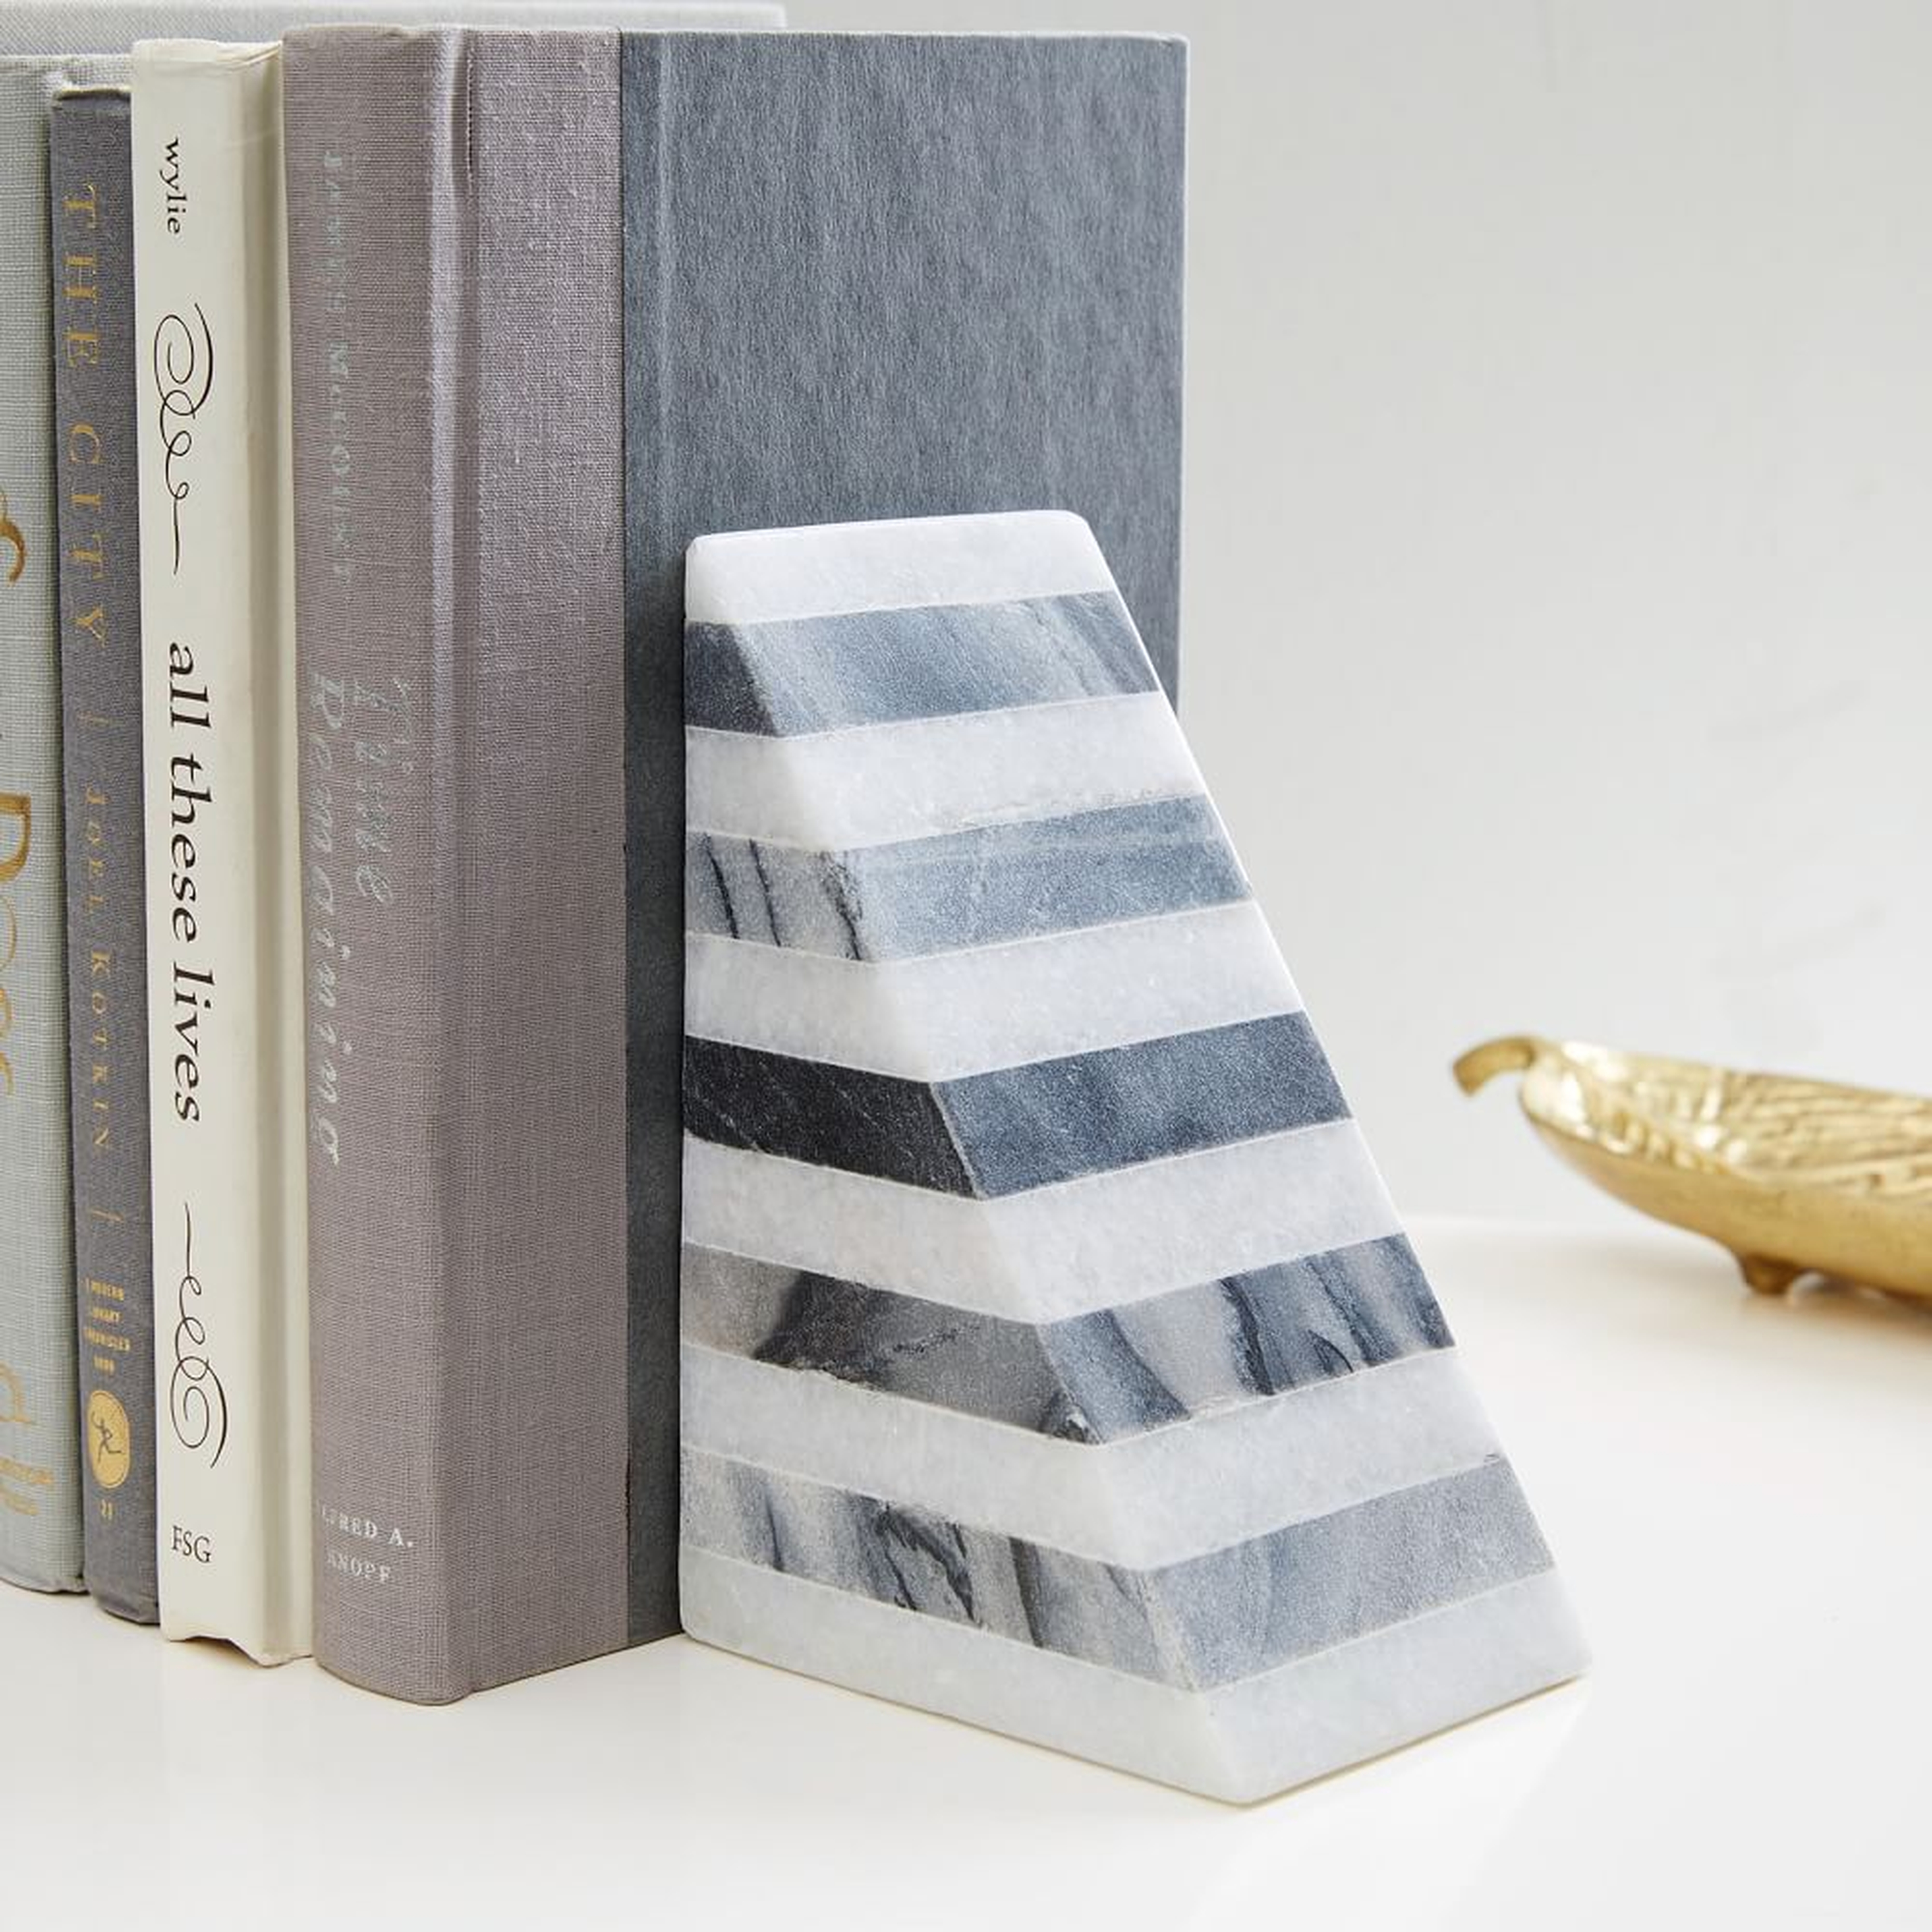 Geometry Bookends, Striped Angle, Black/White - West Elm